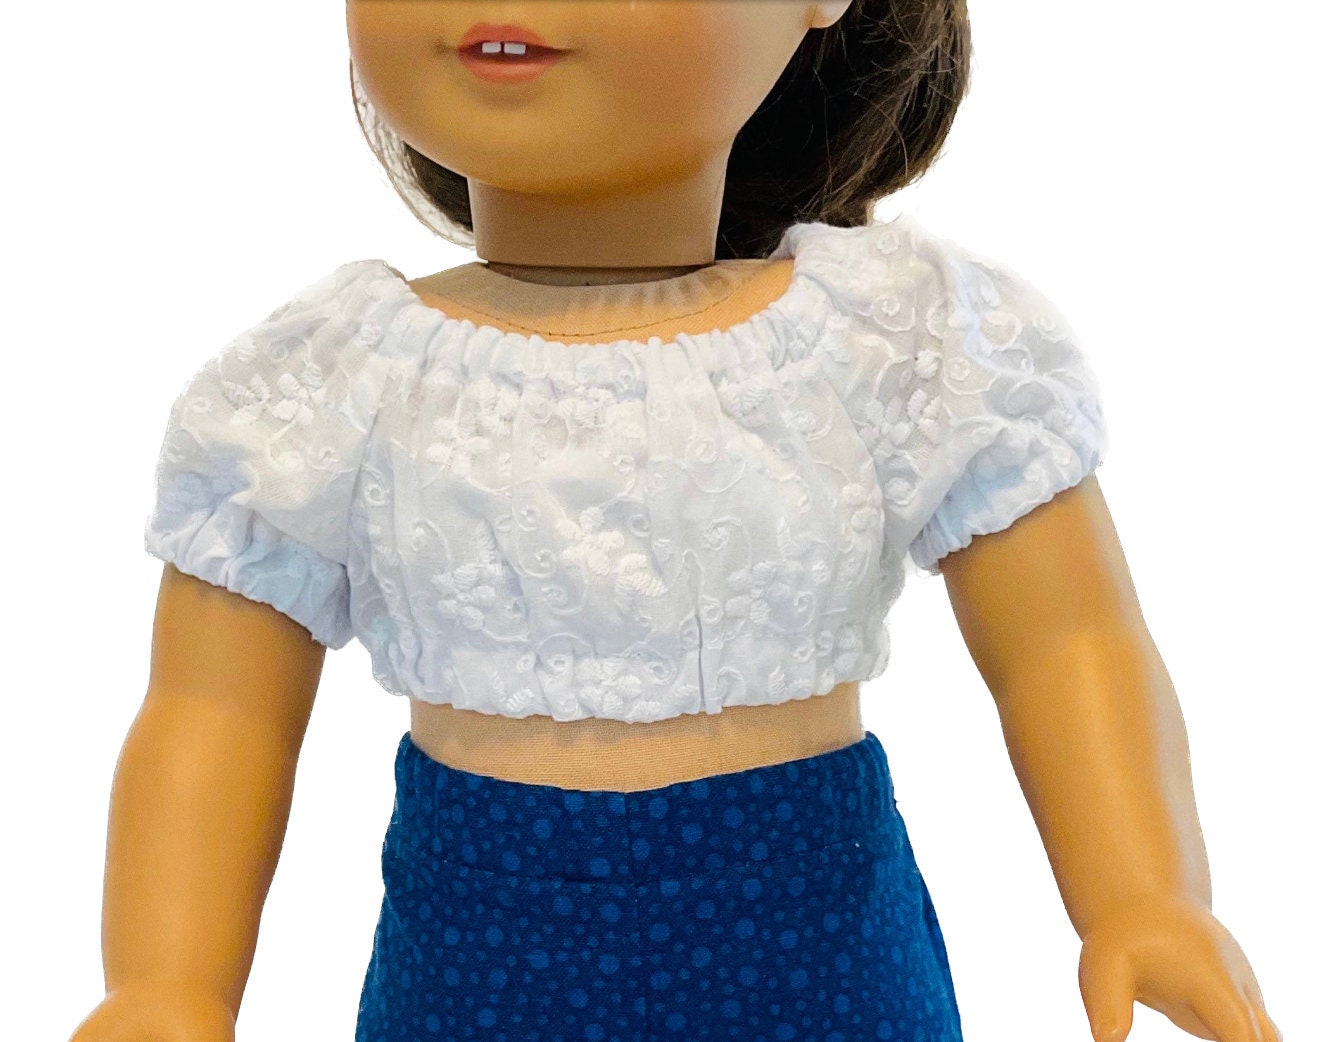 How to Draw Kit, Doll from American Girl - DrawingNow